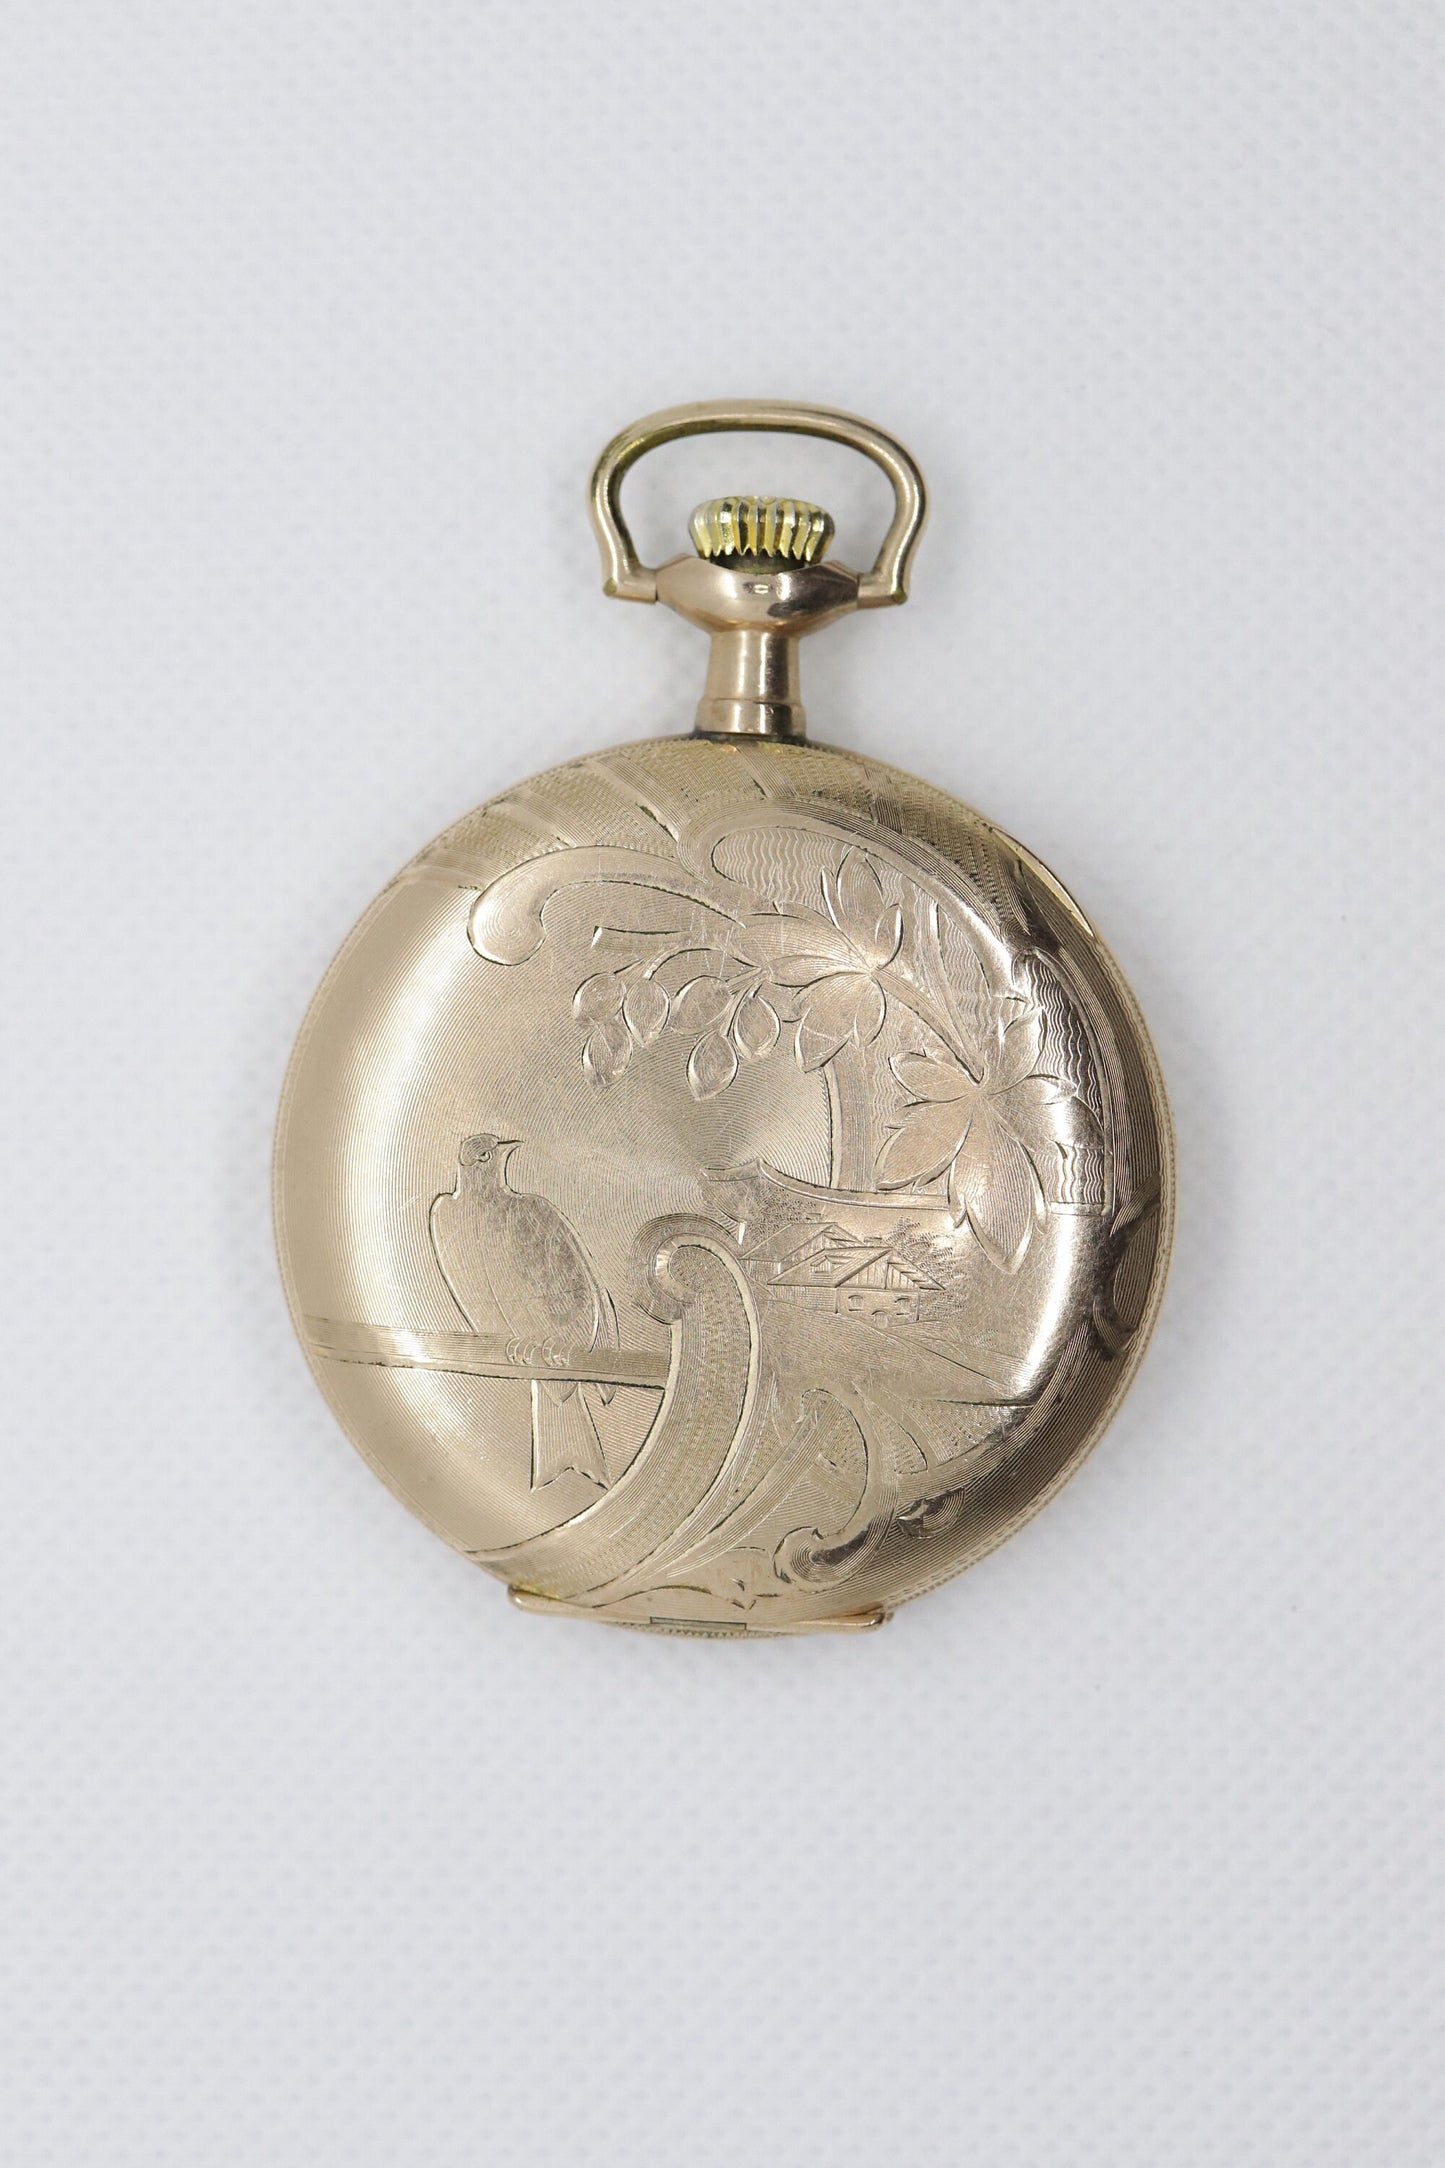 Illinois Central Pocket Watch. Gold Tone Embossed Pocket Watch